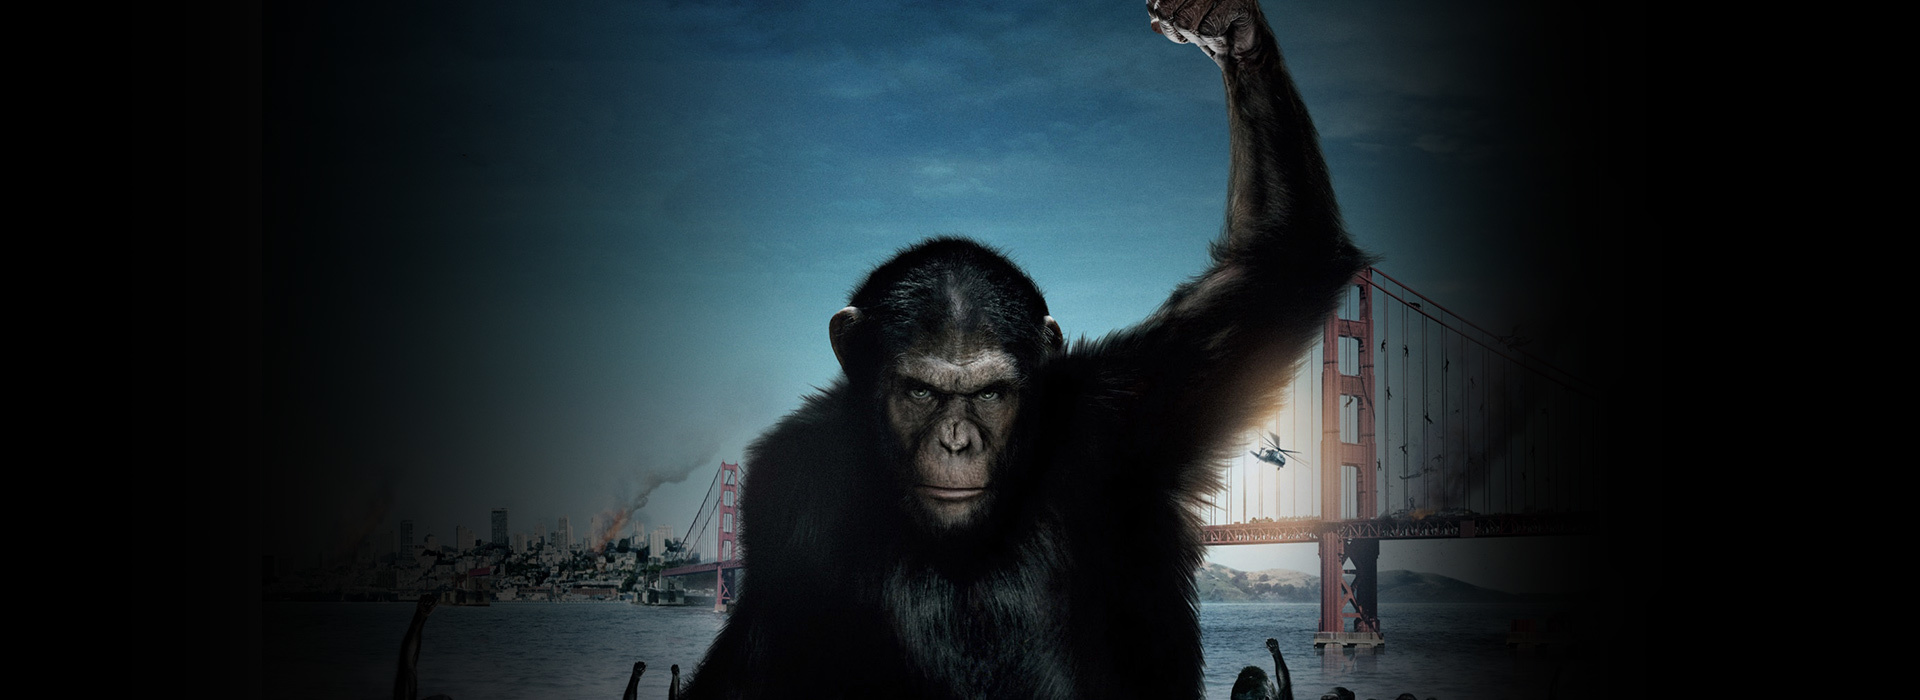 Movie poster Rise of the Planet of the Apes